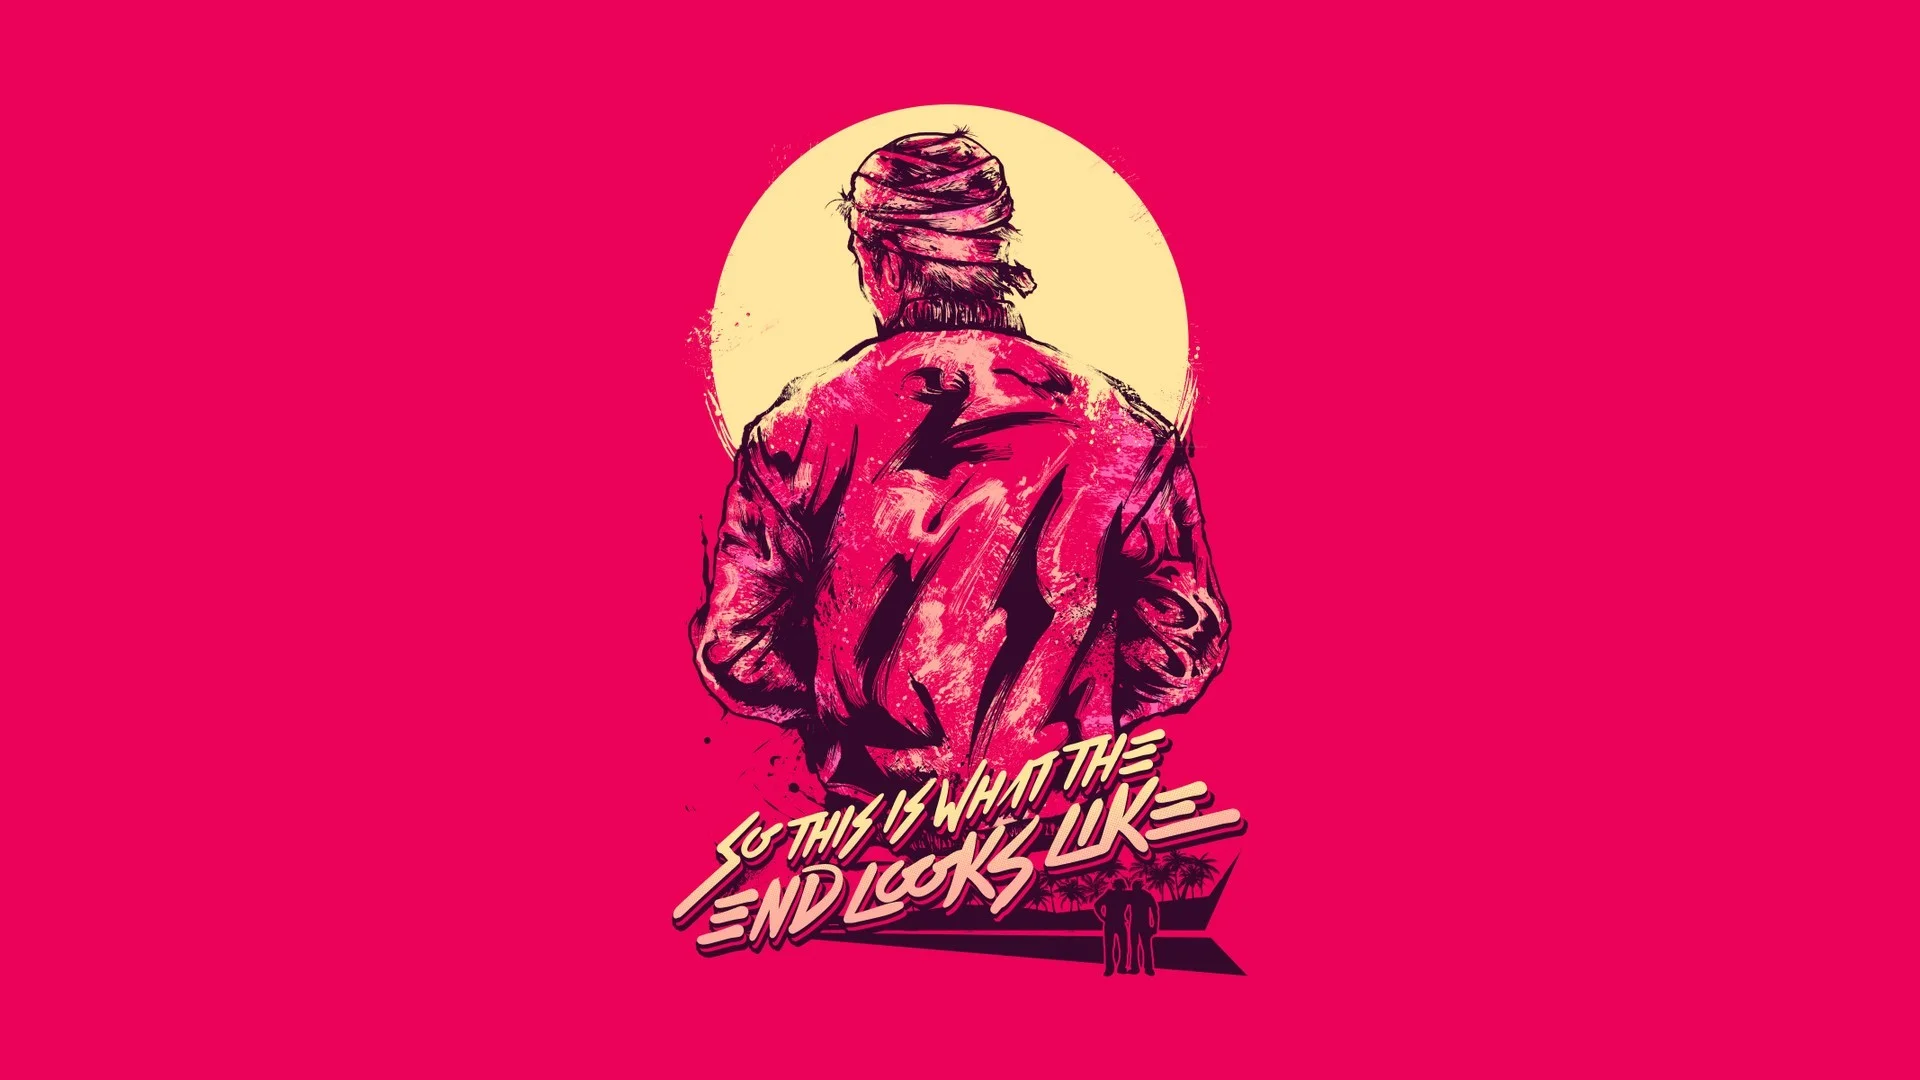 General Hotline Miami Hotline Miami 2 Hotline Miami 2 Wrong Number